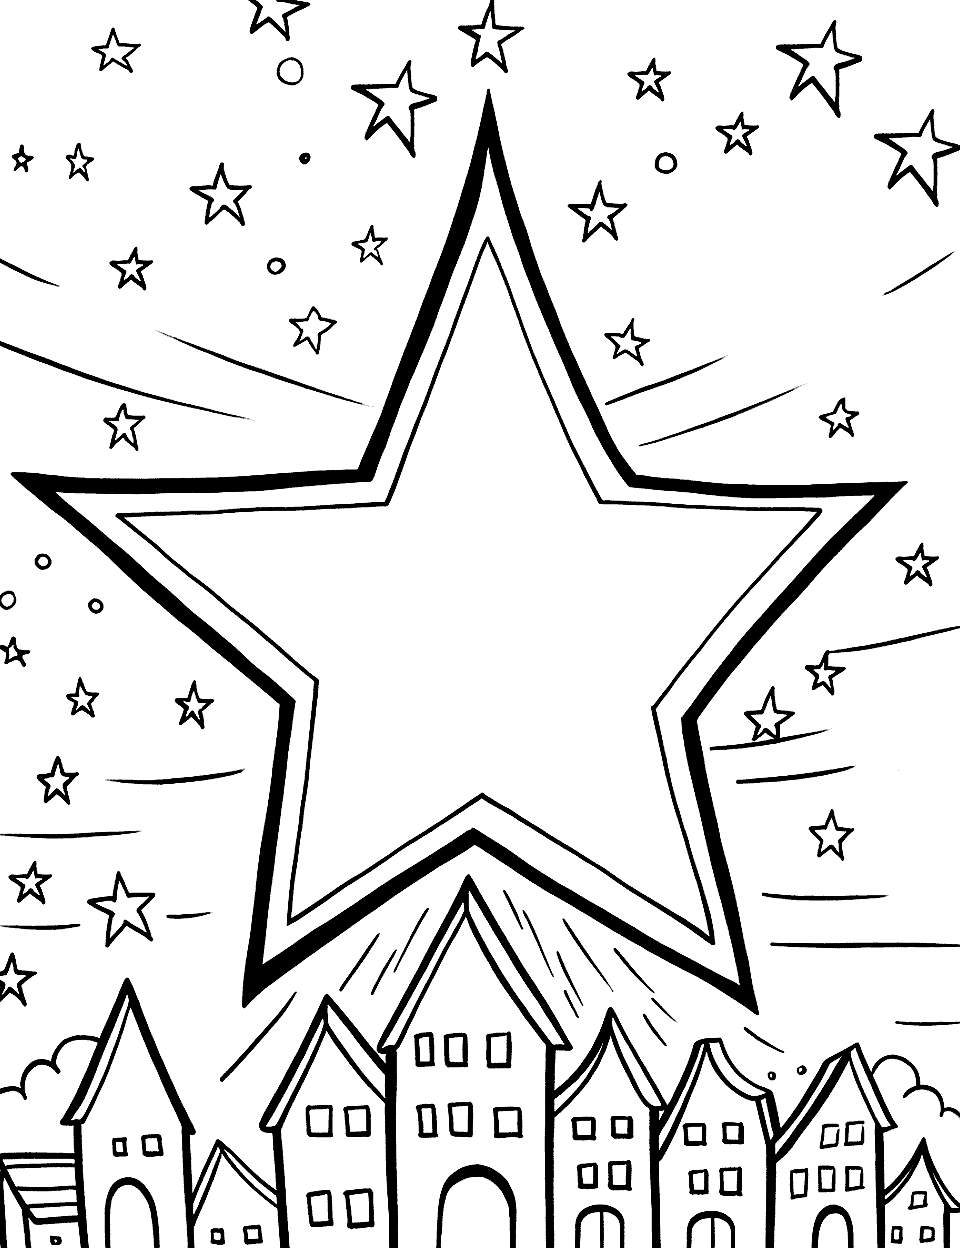 Epiphany Star Coloring Page - A bright star shining over a small town, representing the Epiphany.